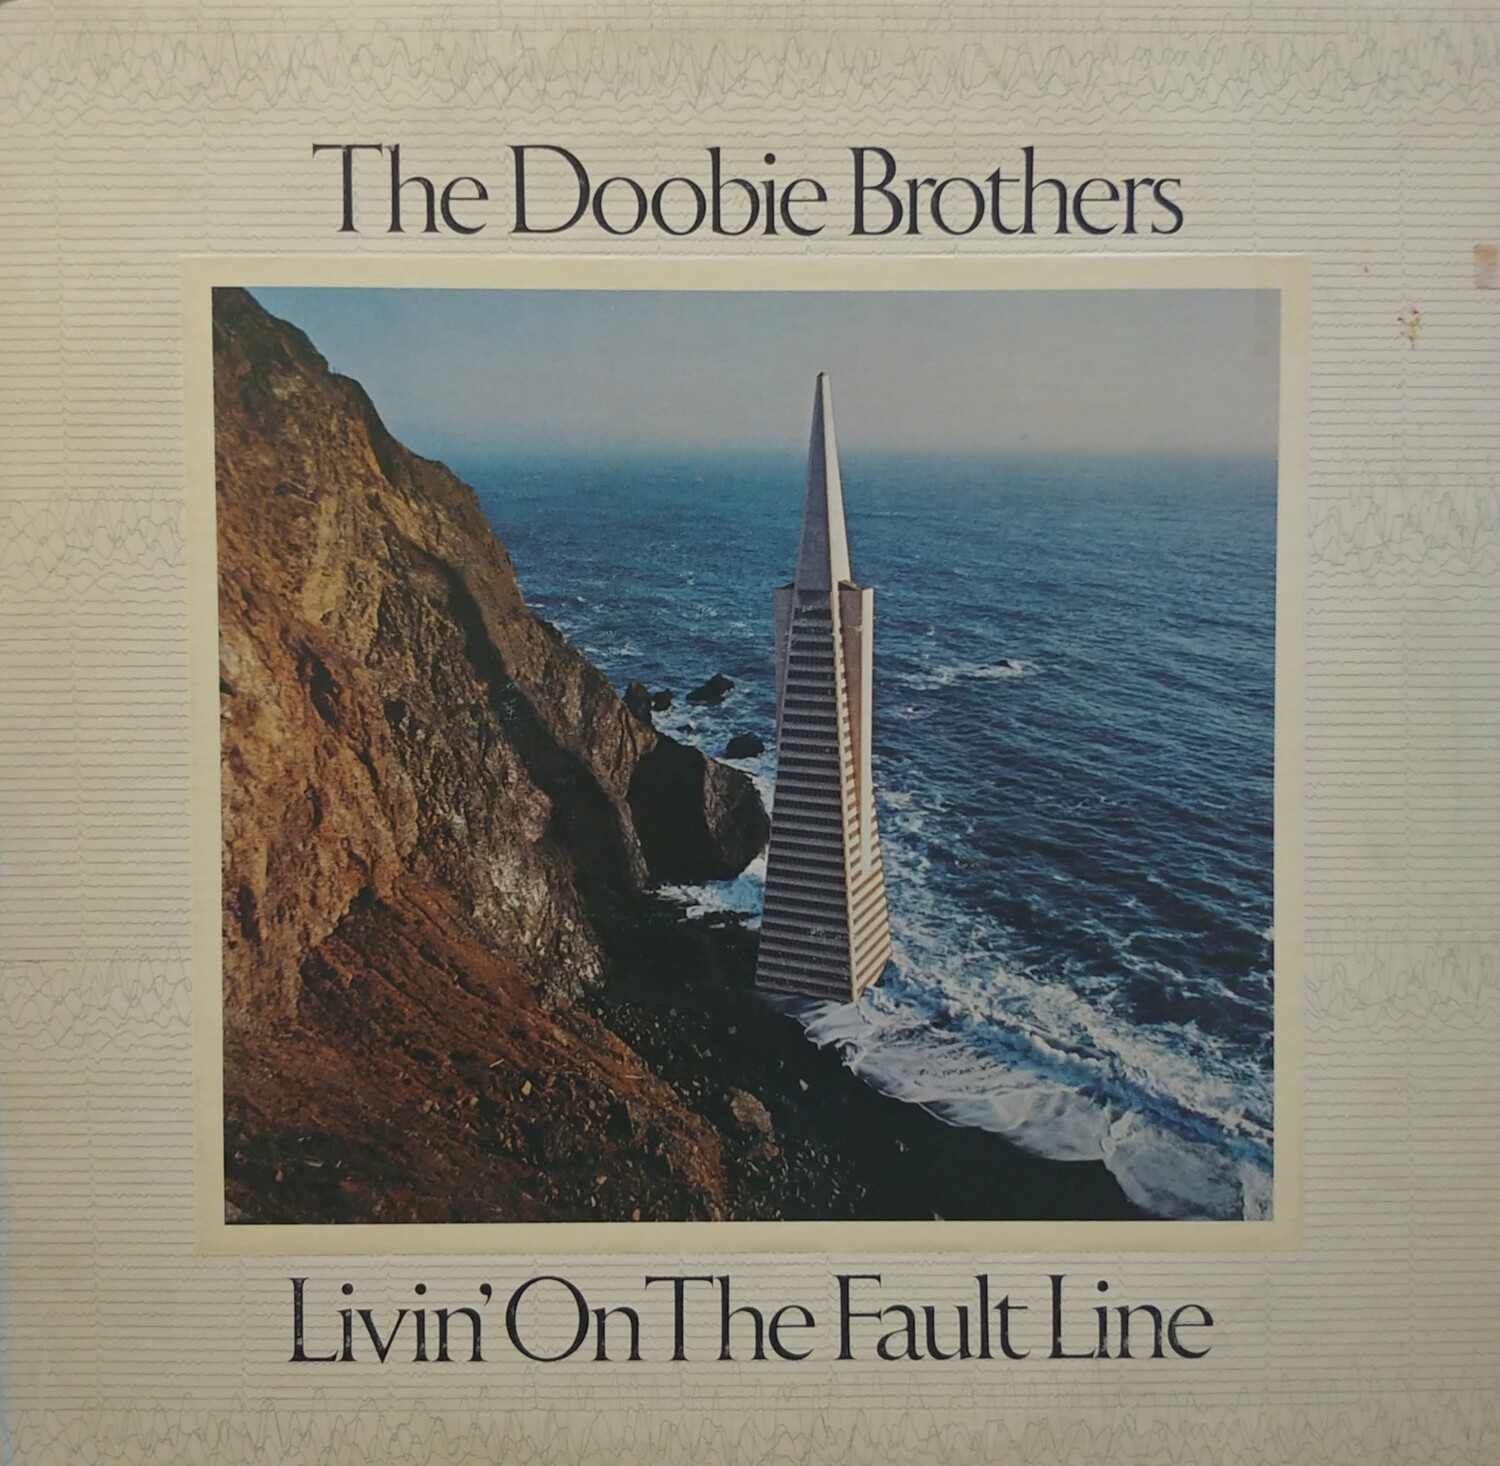 The Doobie Brothers - Livin' on the fault line